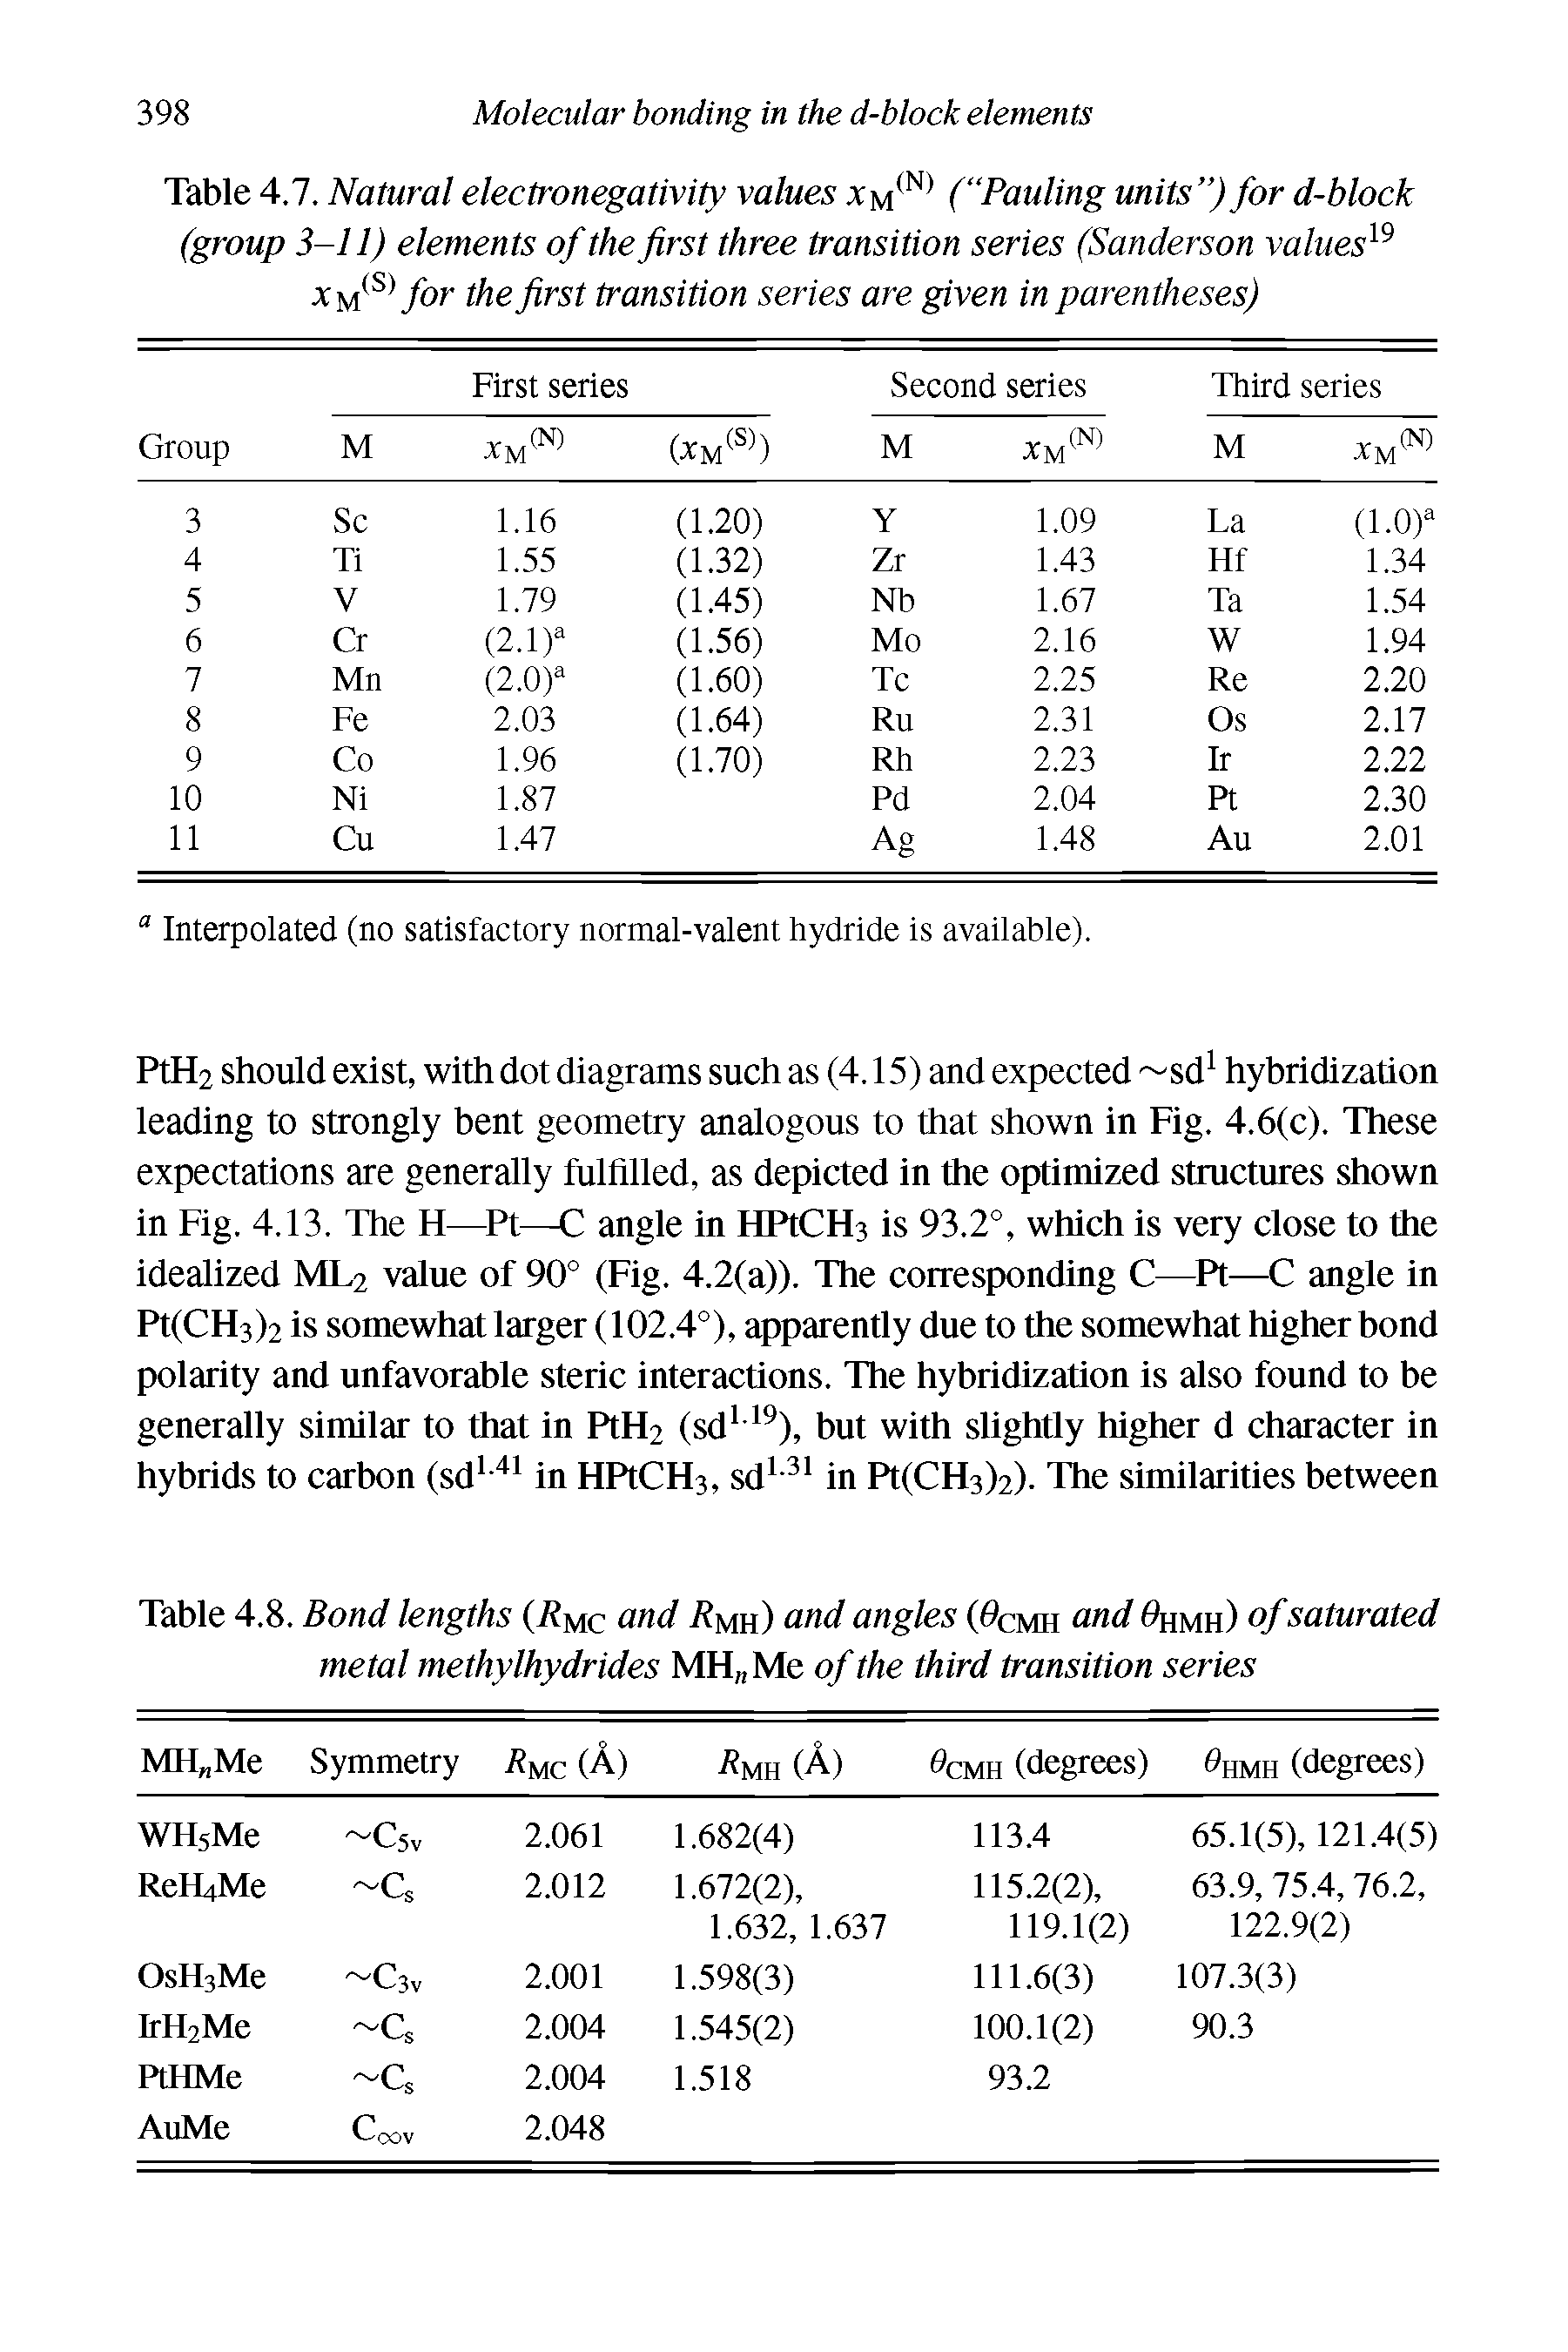 Table 4.8. Bond lengths Rwc and 7 mh) and angles ( cmh and hmh) of saturated metal methylhydrides MH Mc of the third transition series...